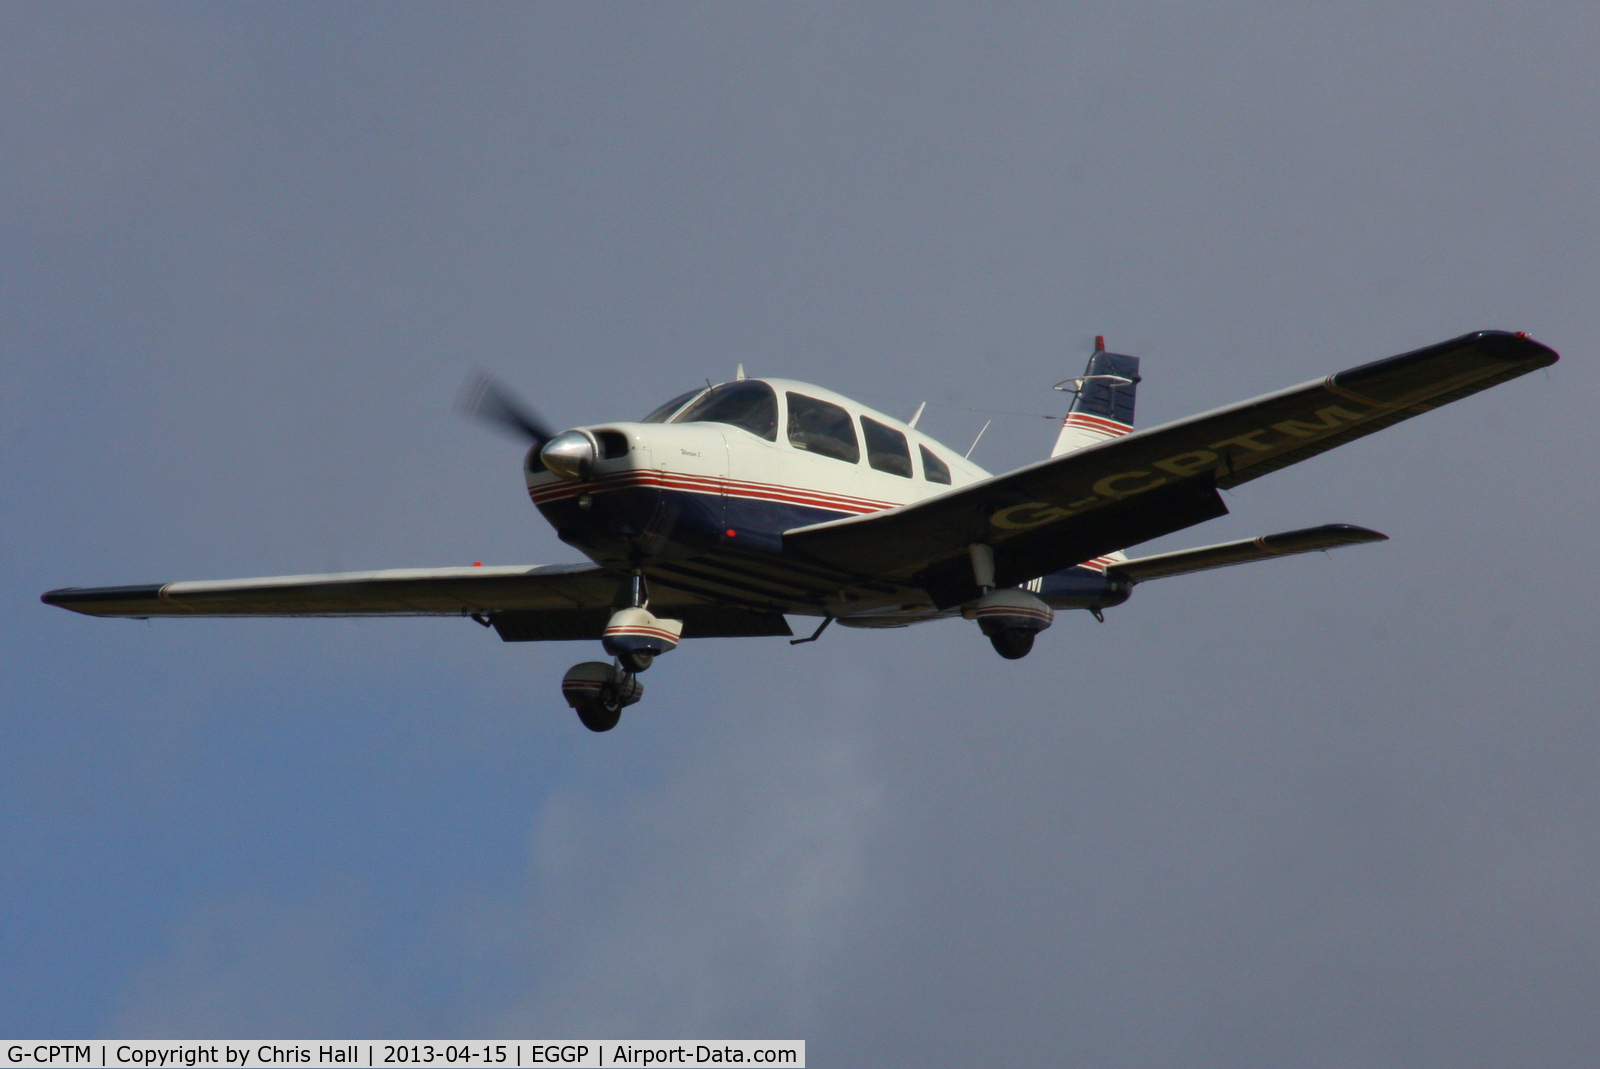 G-CPTM, 1977 Piper PA-28-151 Cherokee Warrior C/N 28-7715012, privately owned